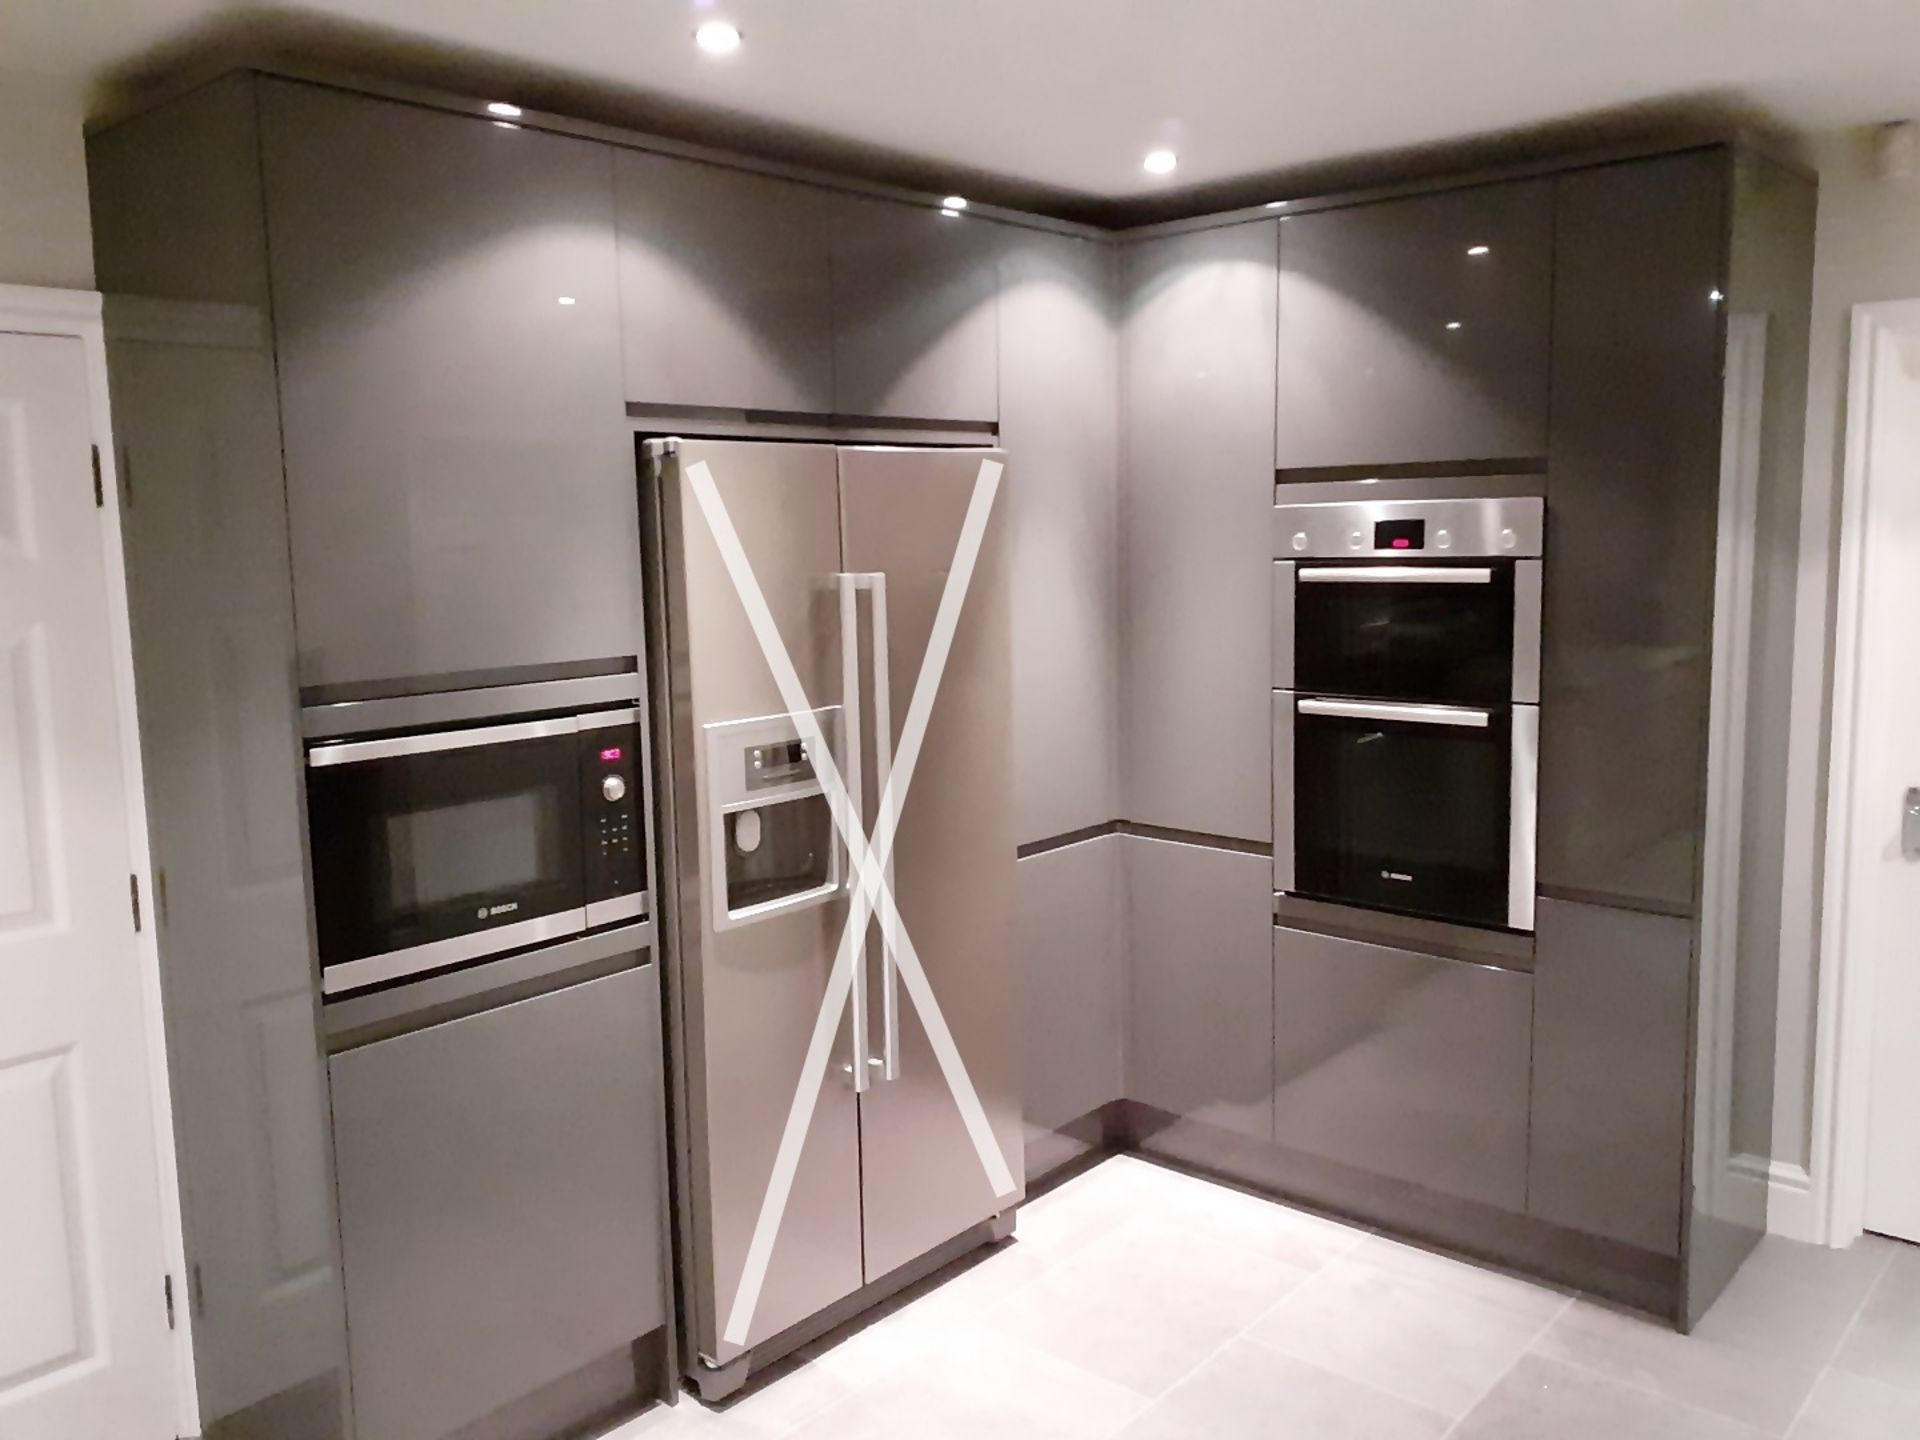 1 x Fitted Kitchen With A Sleek Handleless Design, Integrated Bosch Appliances + Granite Worktops - Image 3 of 69